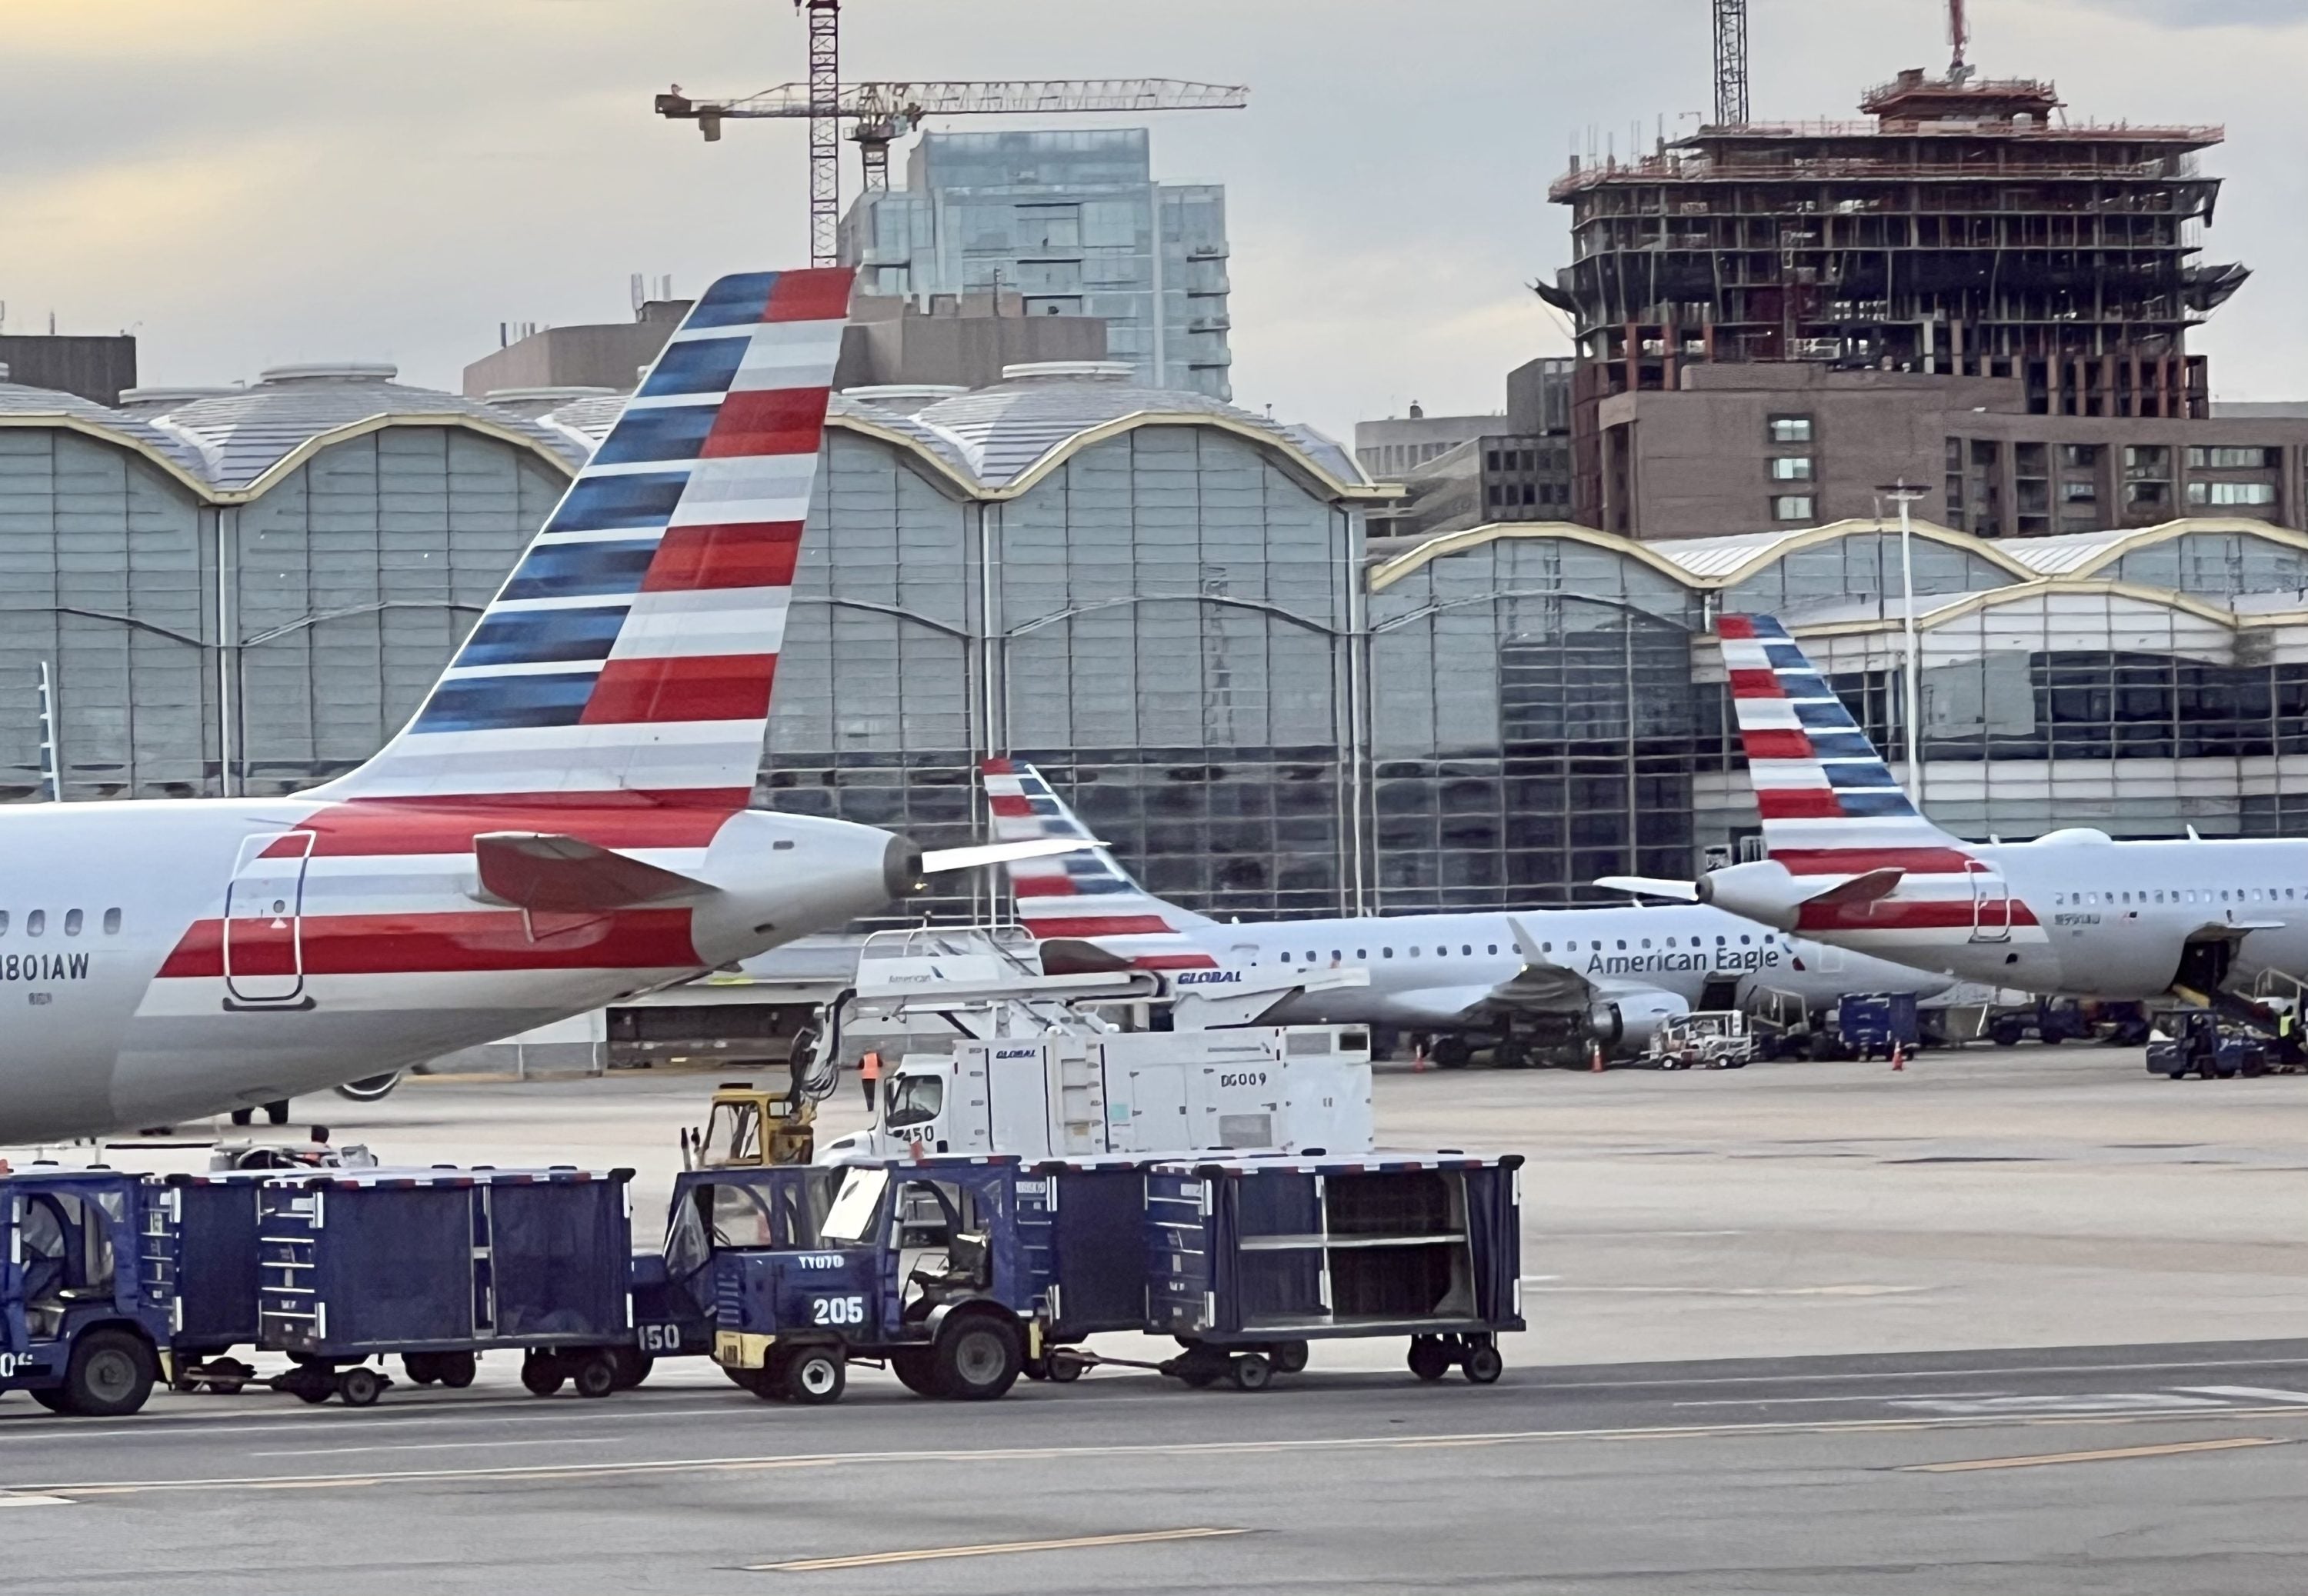 American Airlines aircraft at DCA